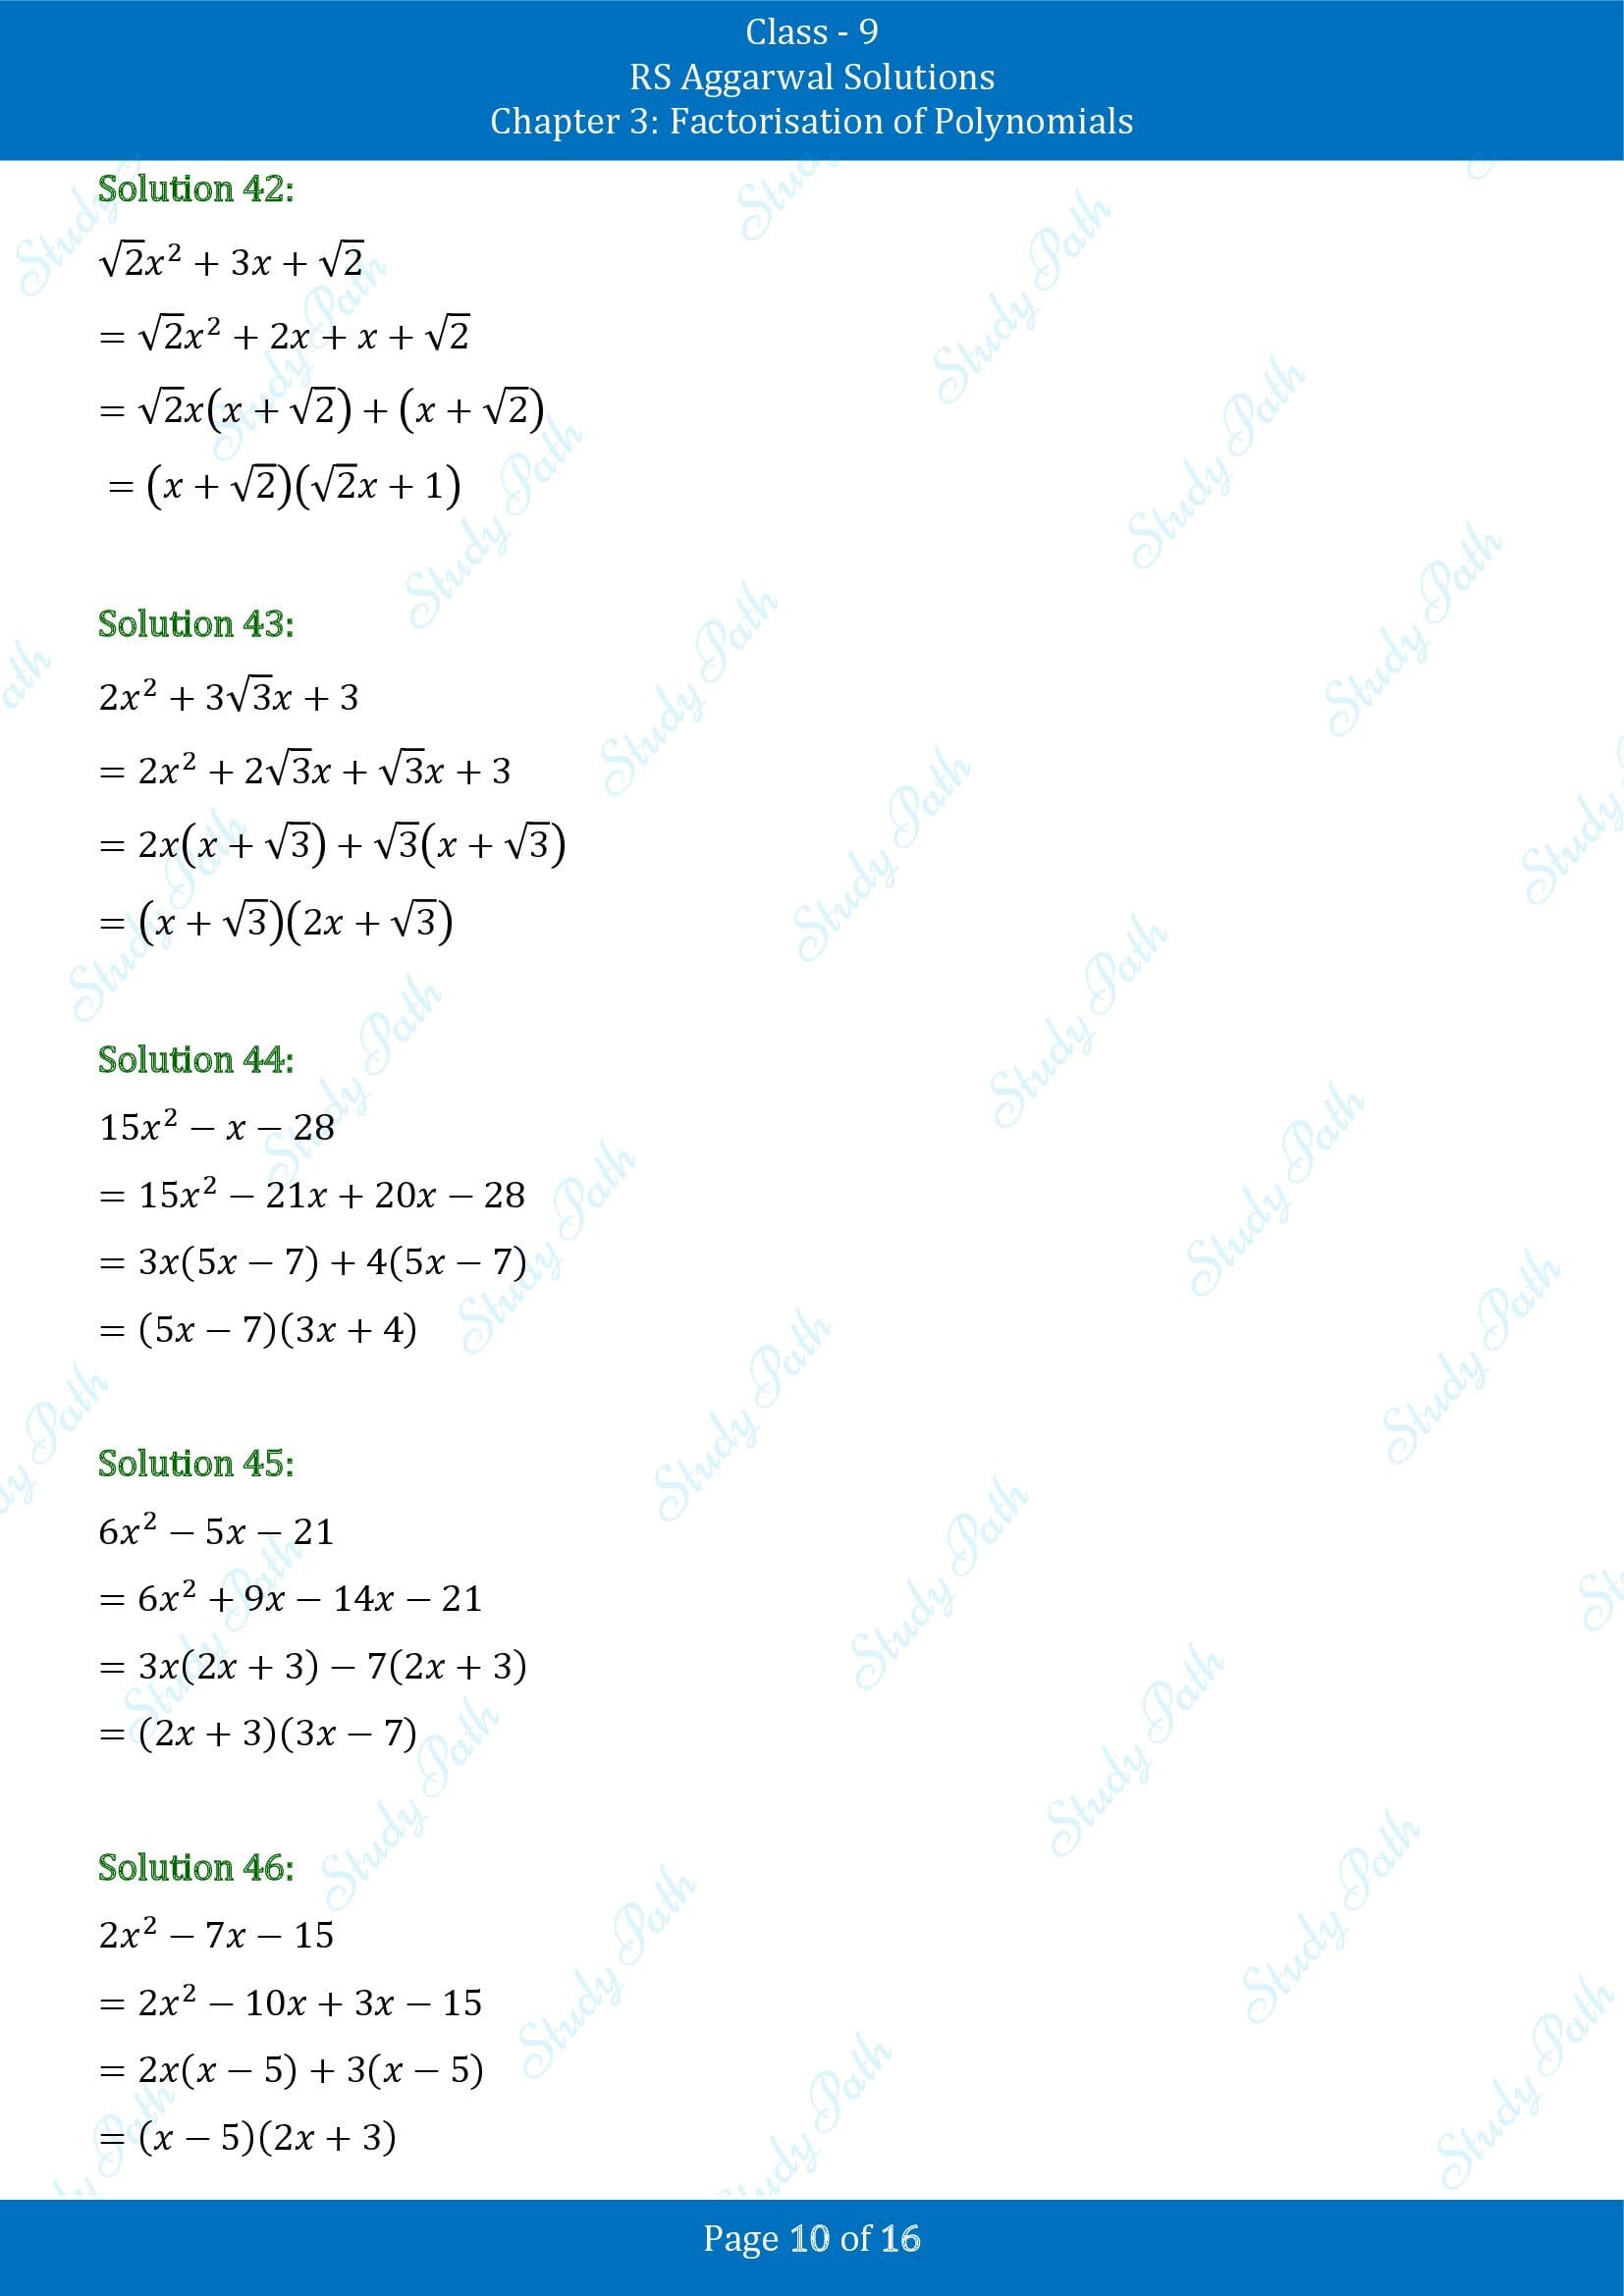 RS Aggarwal Solutions Class 9 Chapter 3 Factorisation of Polynomials Exercise 3C 00010